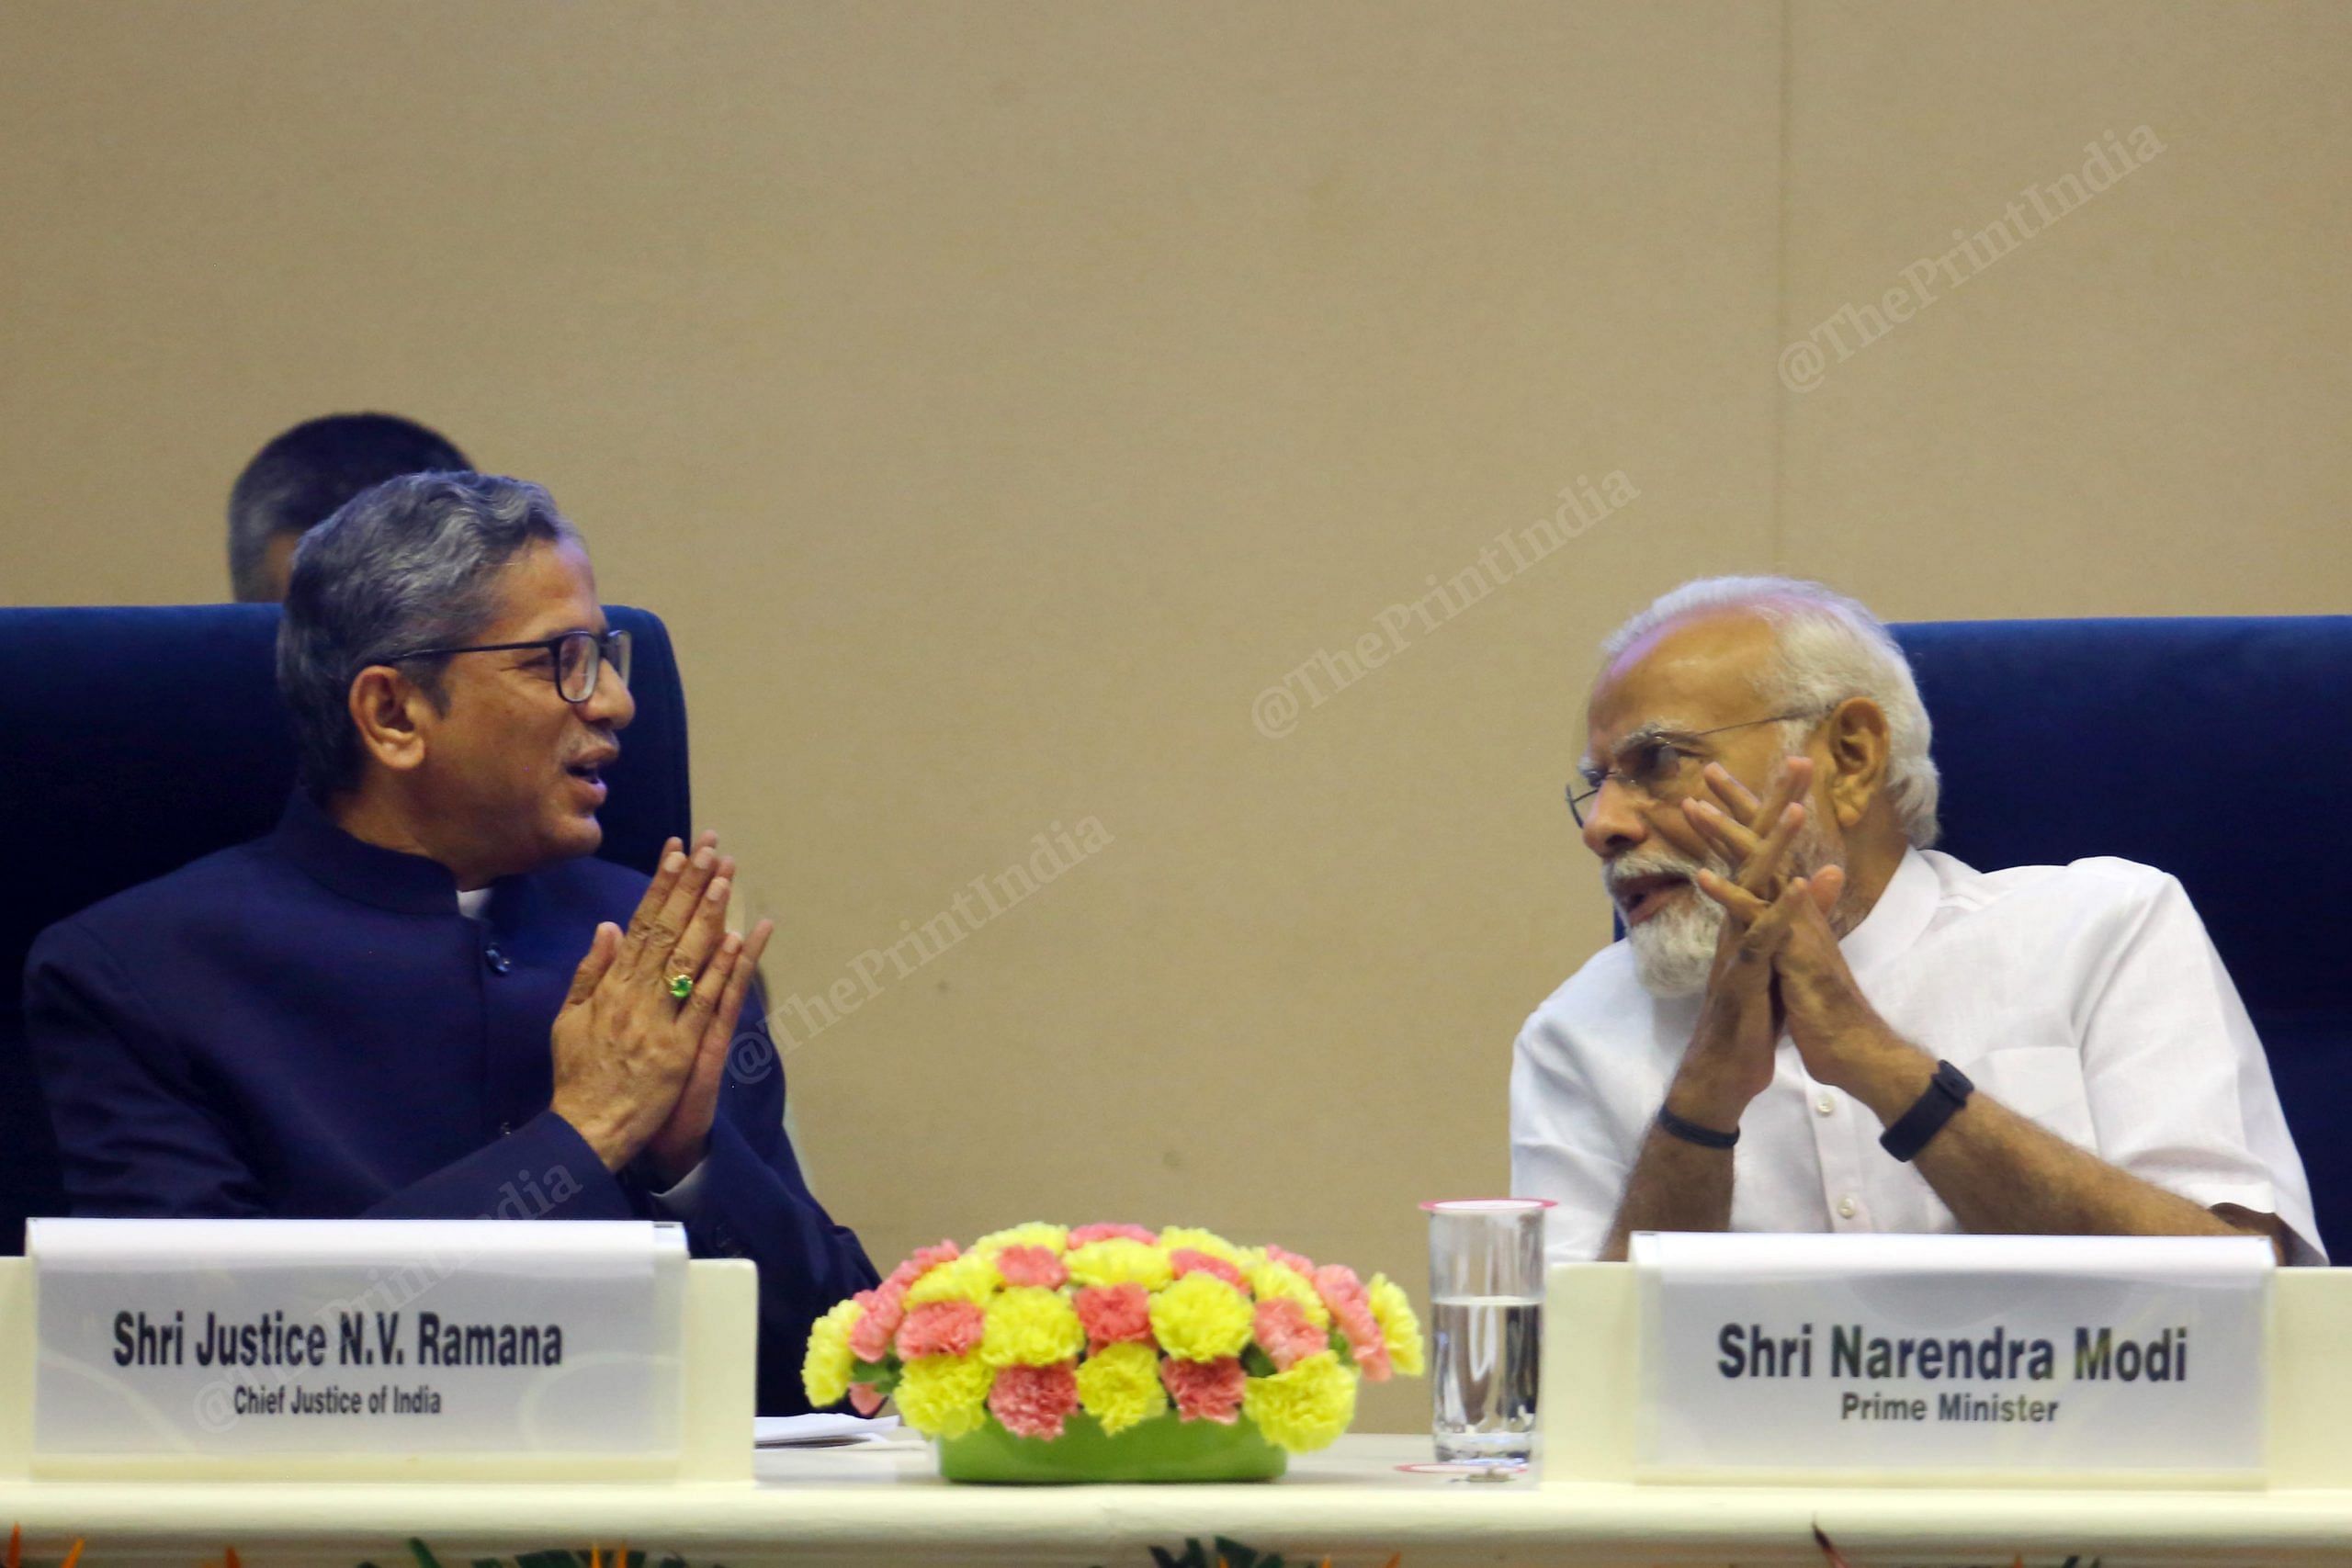 Prime Minister Narendra Modi with Chief Justice of India N.V. Ramana during the inaugural session of First All India District Legal Services Authorities Meet, at Vigyan Bhawan in New Delhi | Praveen Jain | ThePrint